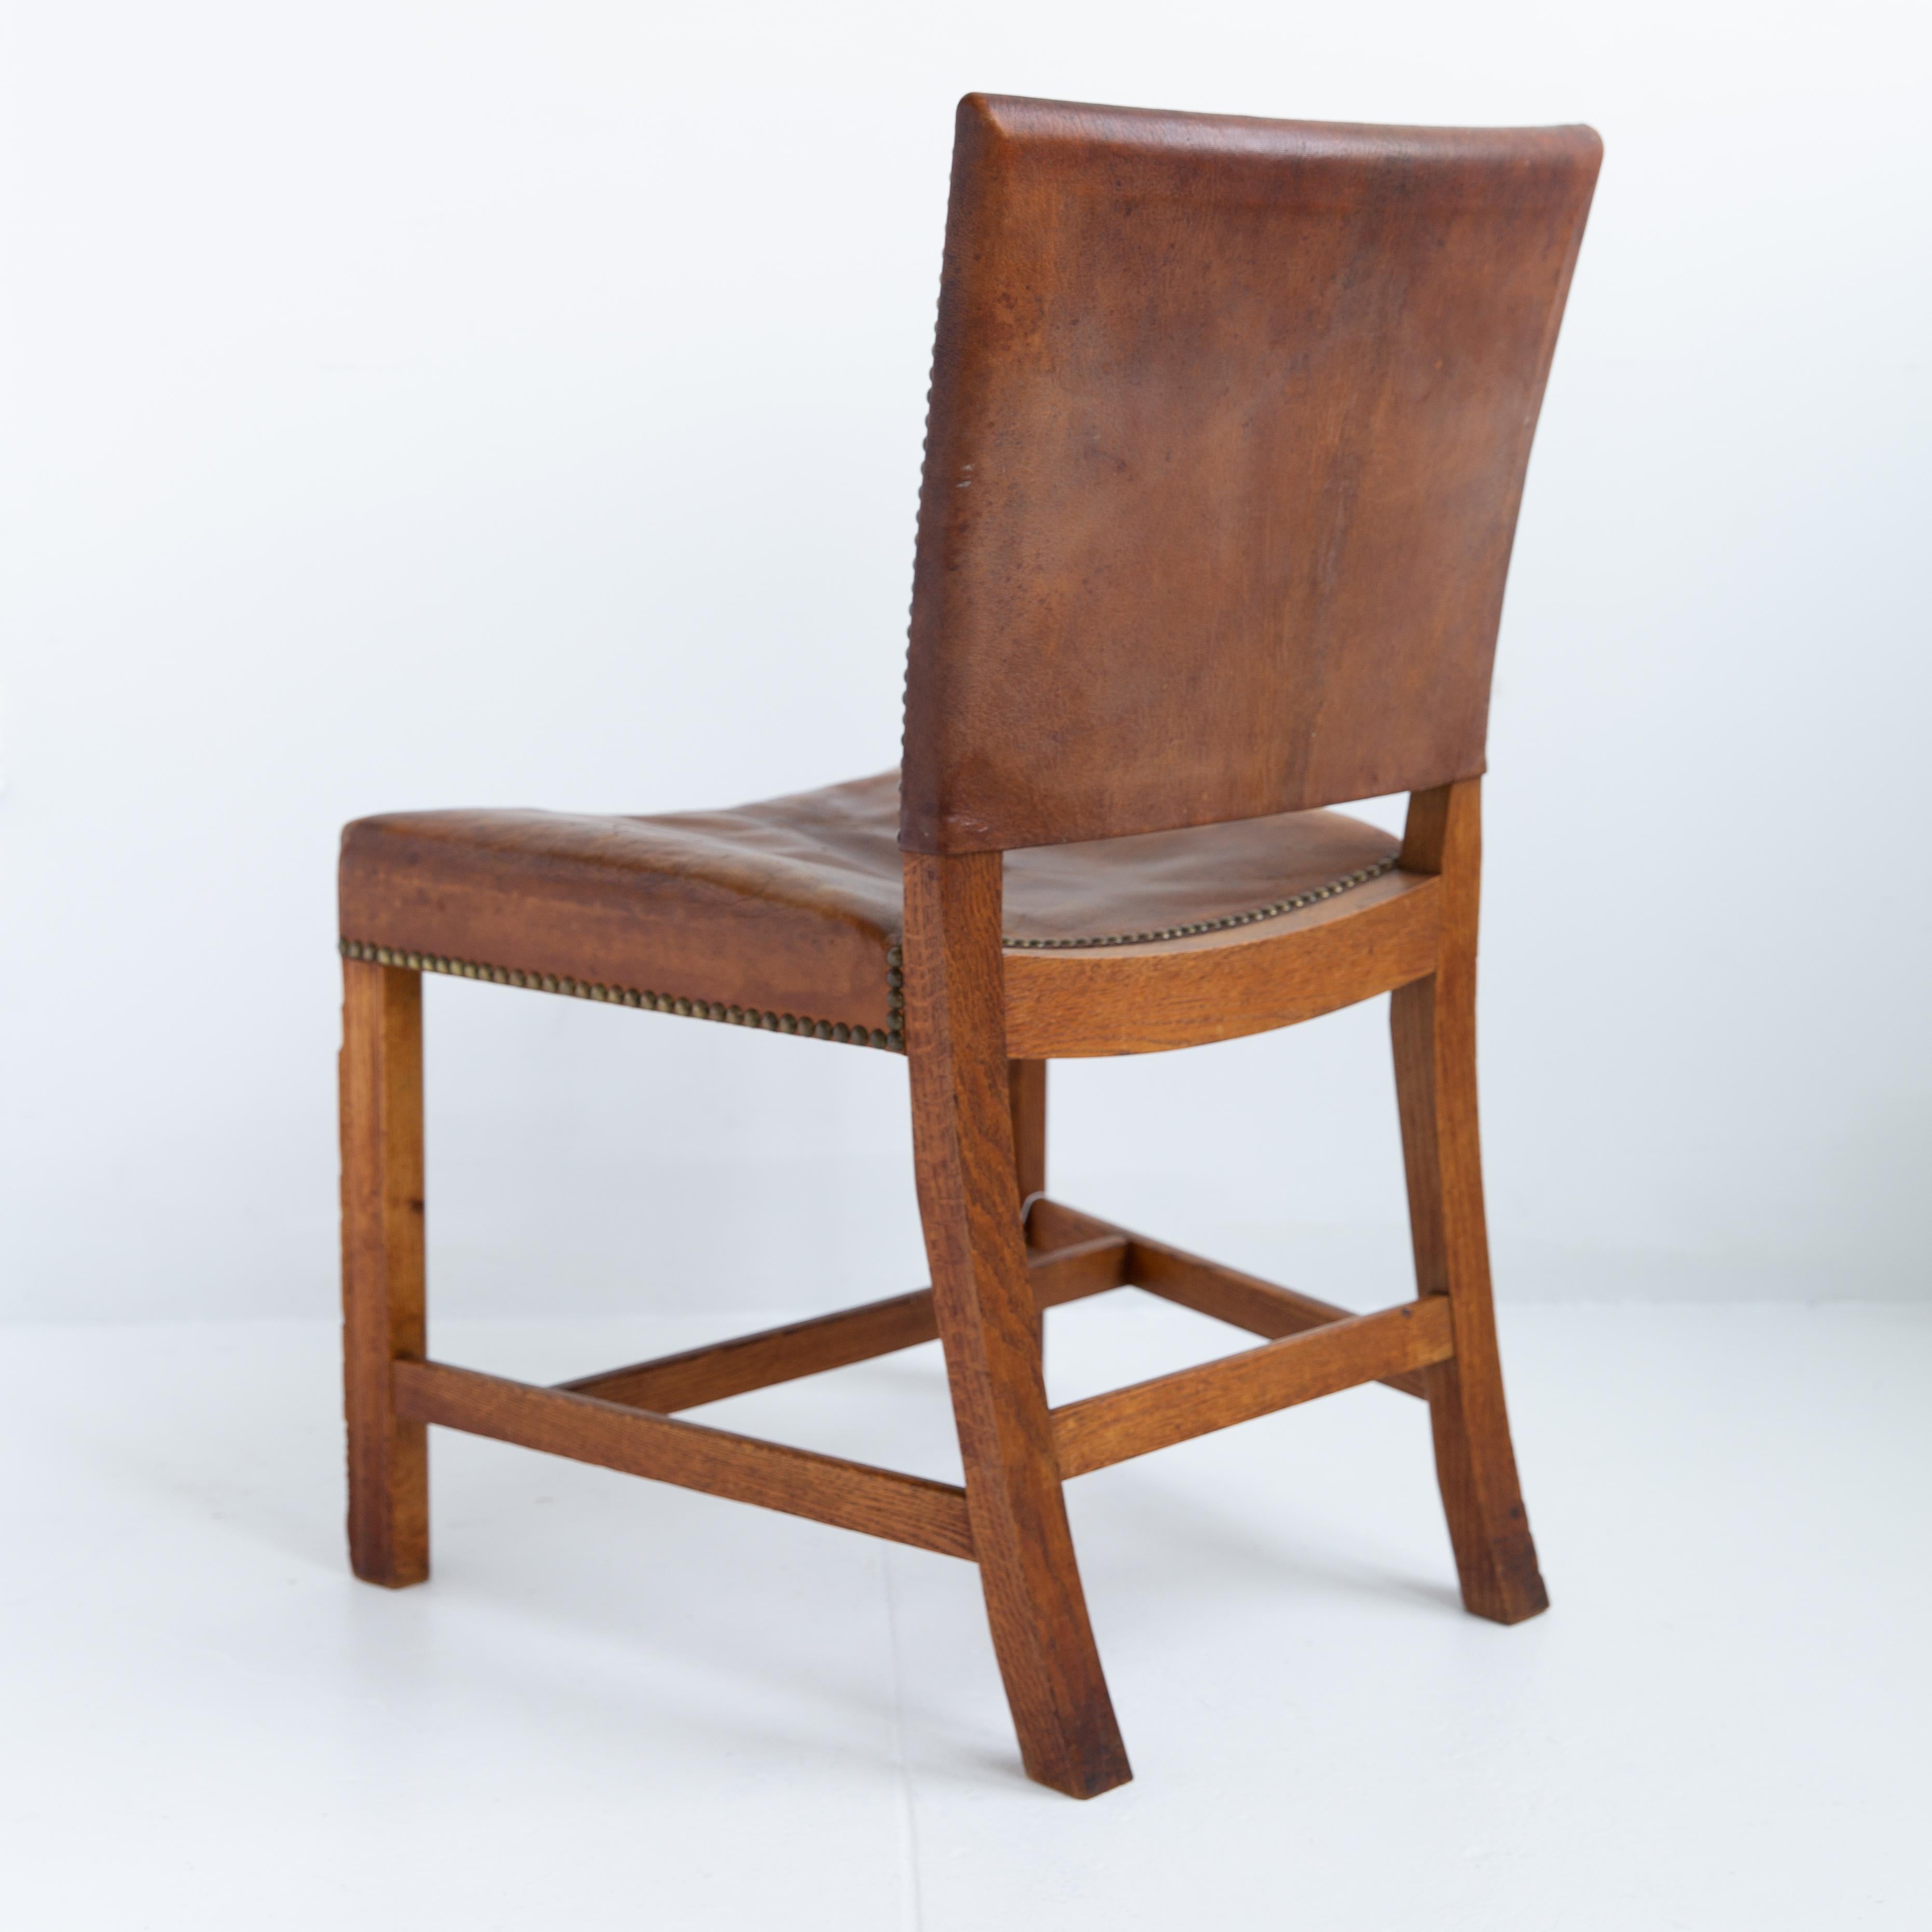 A pair of Kaare Klint designed Barcelona dining chairs (Model 3758) in excellent vintage condition. Originally manufactured by Rud. Rasmussens Snedkerier in 1927, these mid-century modern chairs originating in Denmark feature a Cuban mahogany frame,